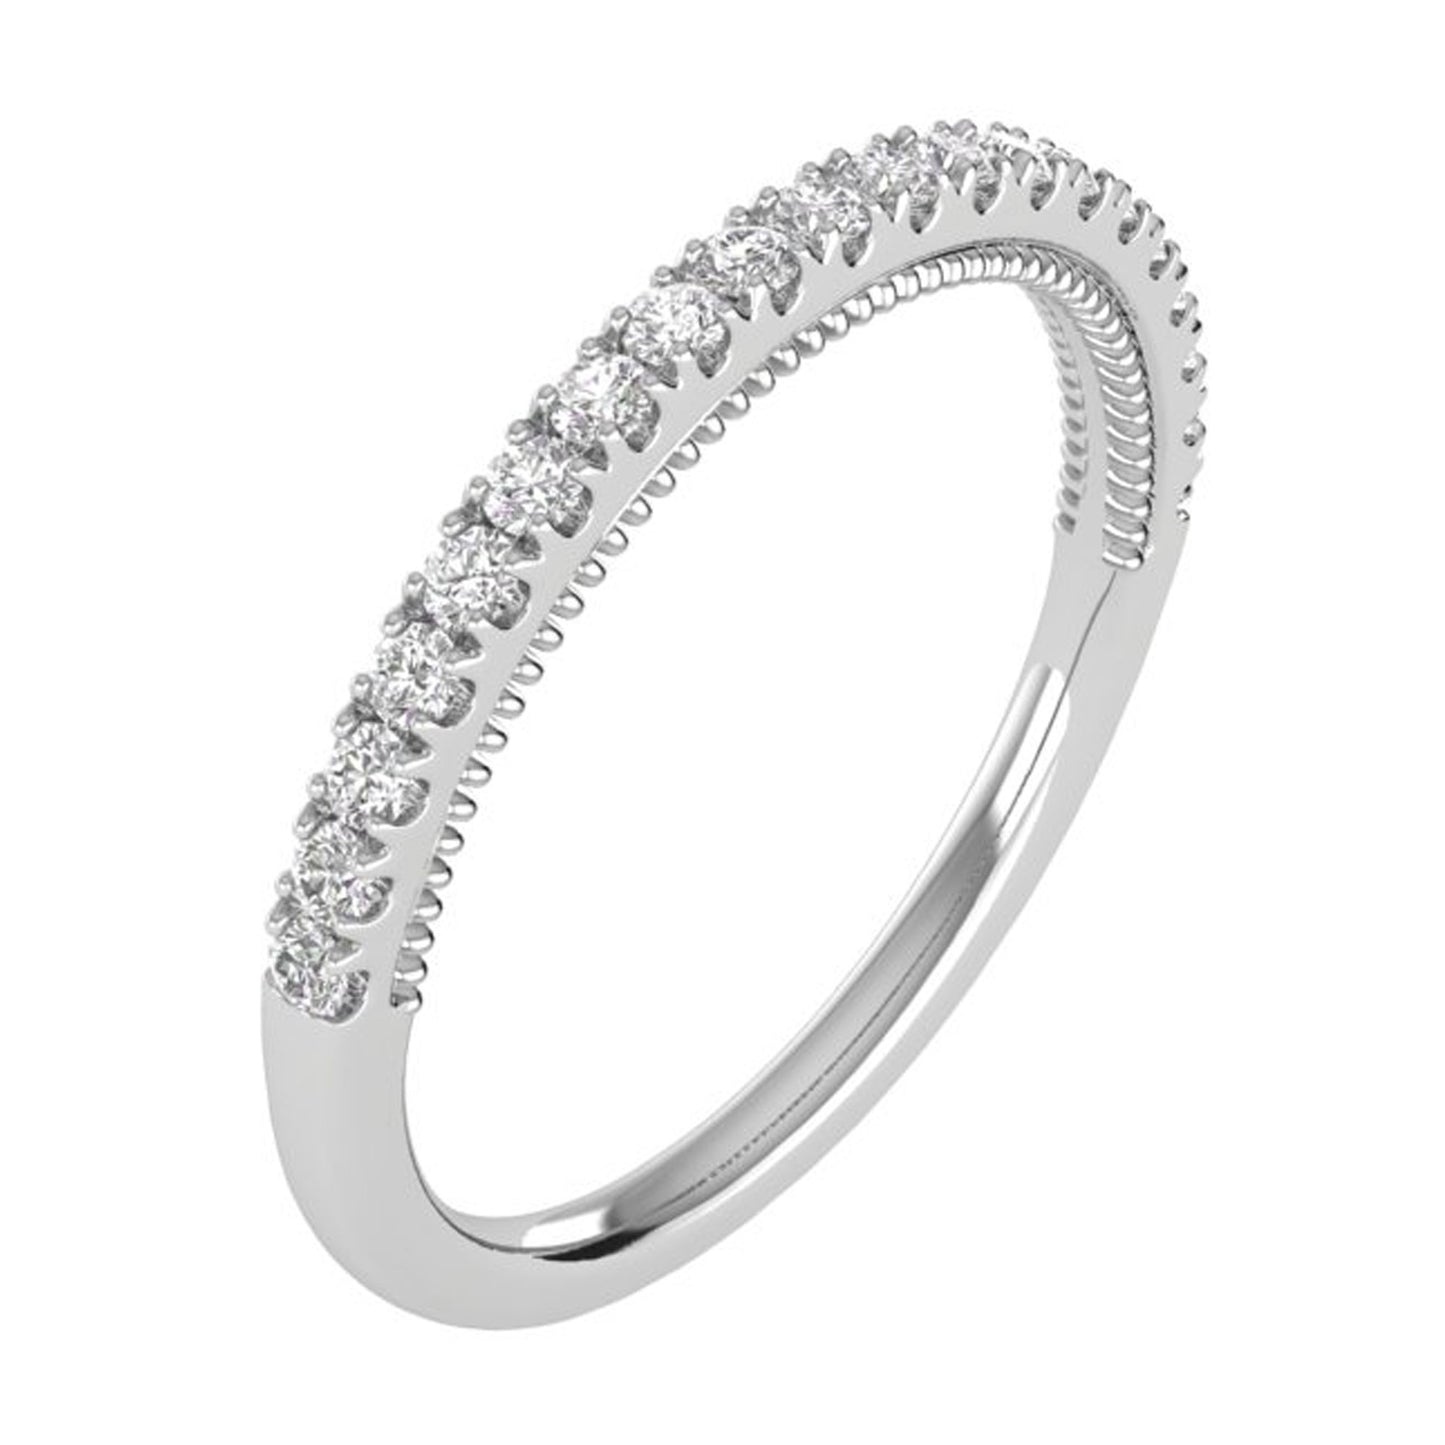 1/4 CTW COLORLESS FLAWLESS FRENCH PAVE WITH MILGRAIN WEDDING BAND